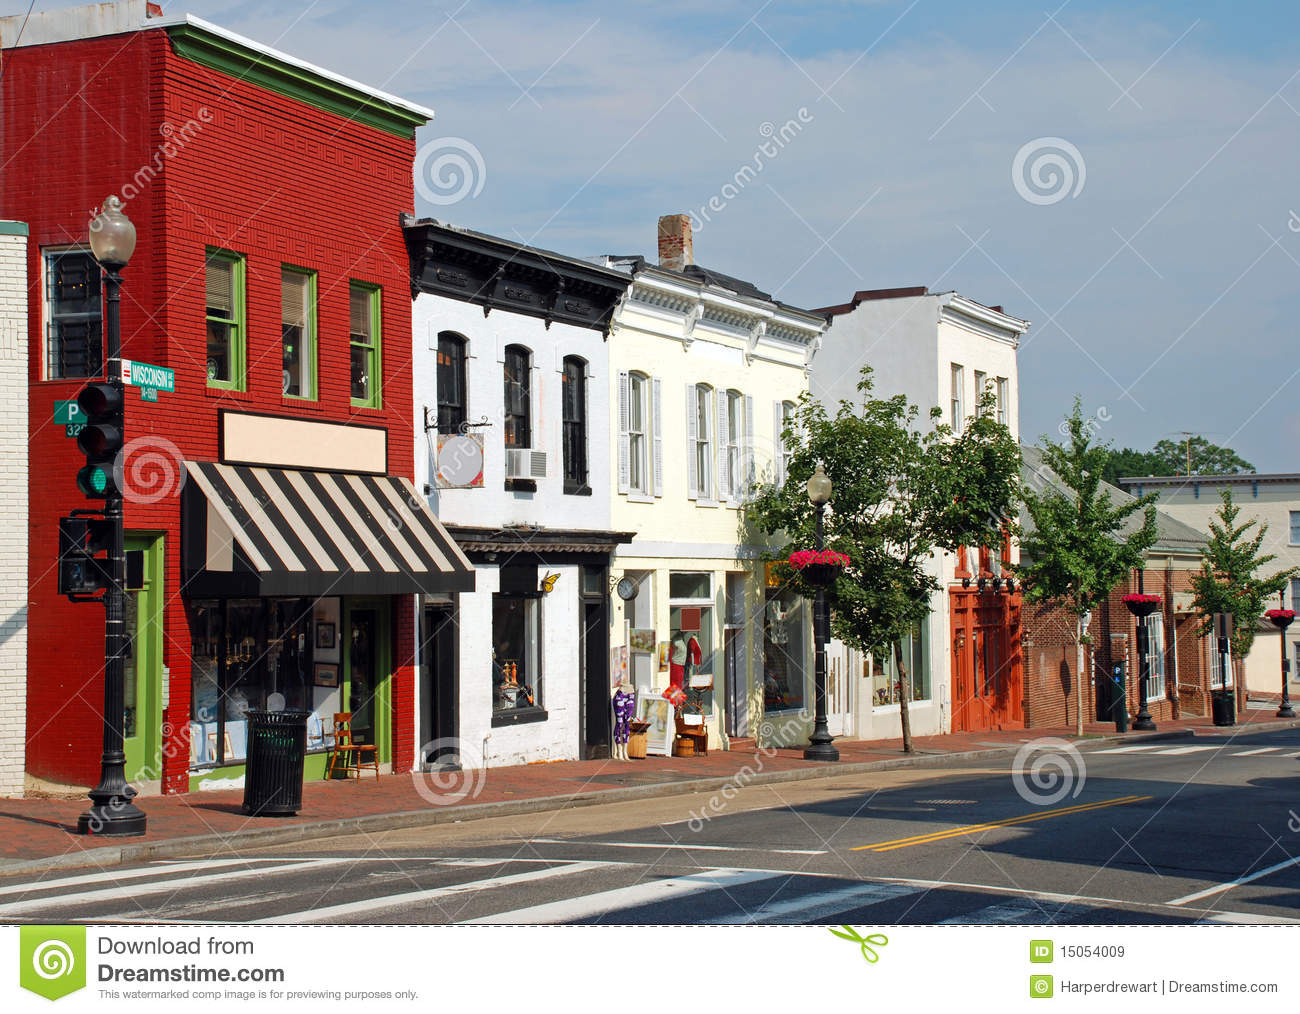 Com Royalty Free Stock Images Small Town Main Street 2 Image15054009